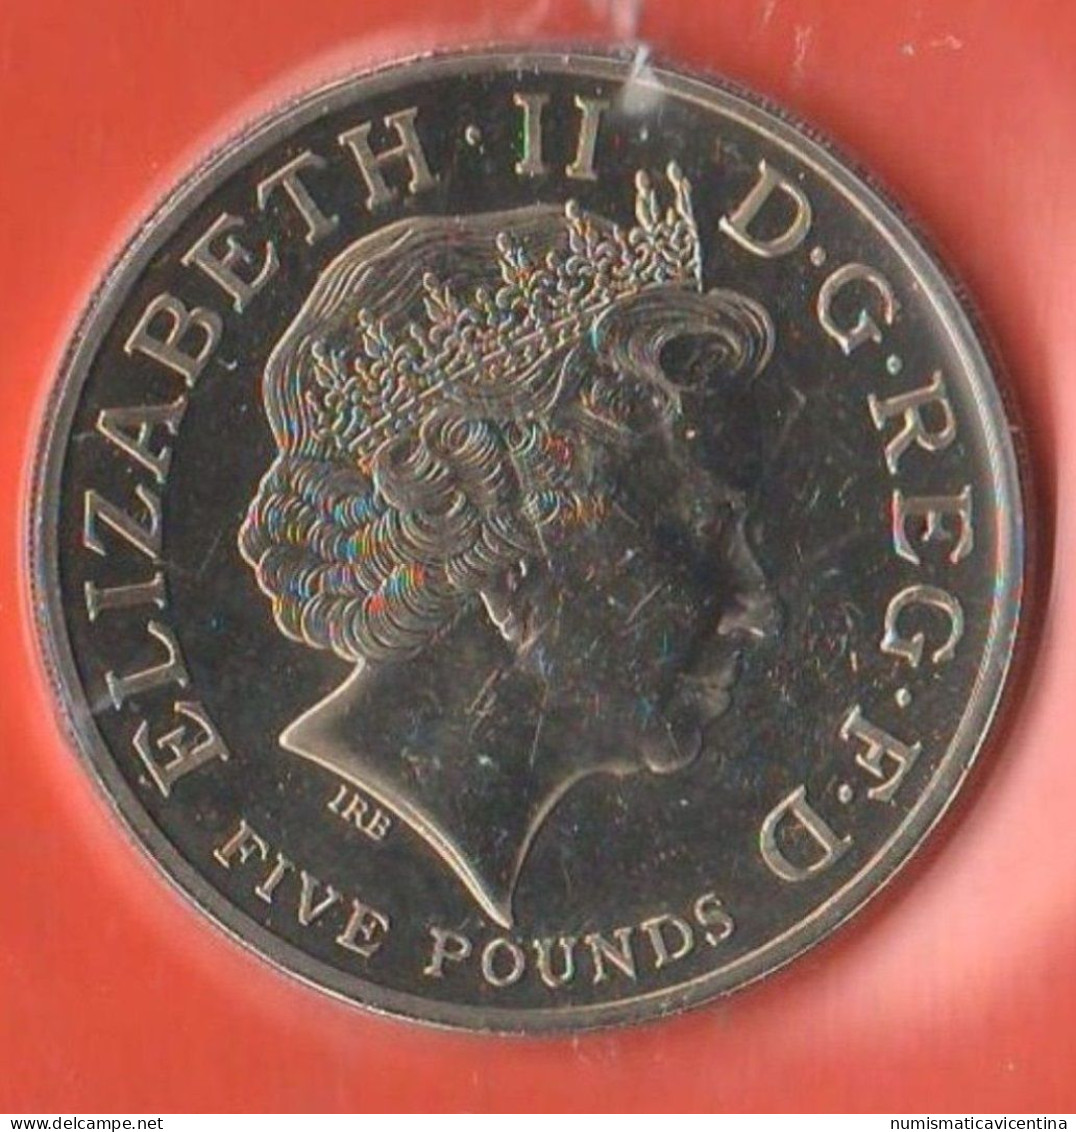 UK 5 Pounds 2004 England Inghilterra 100th Traités Franco-Anglais 1904 - 2004 Nickel Coin GB Angleterre - 5 Pounds